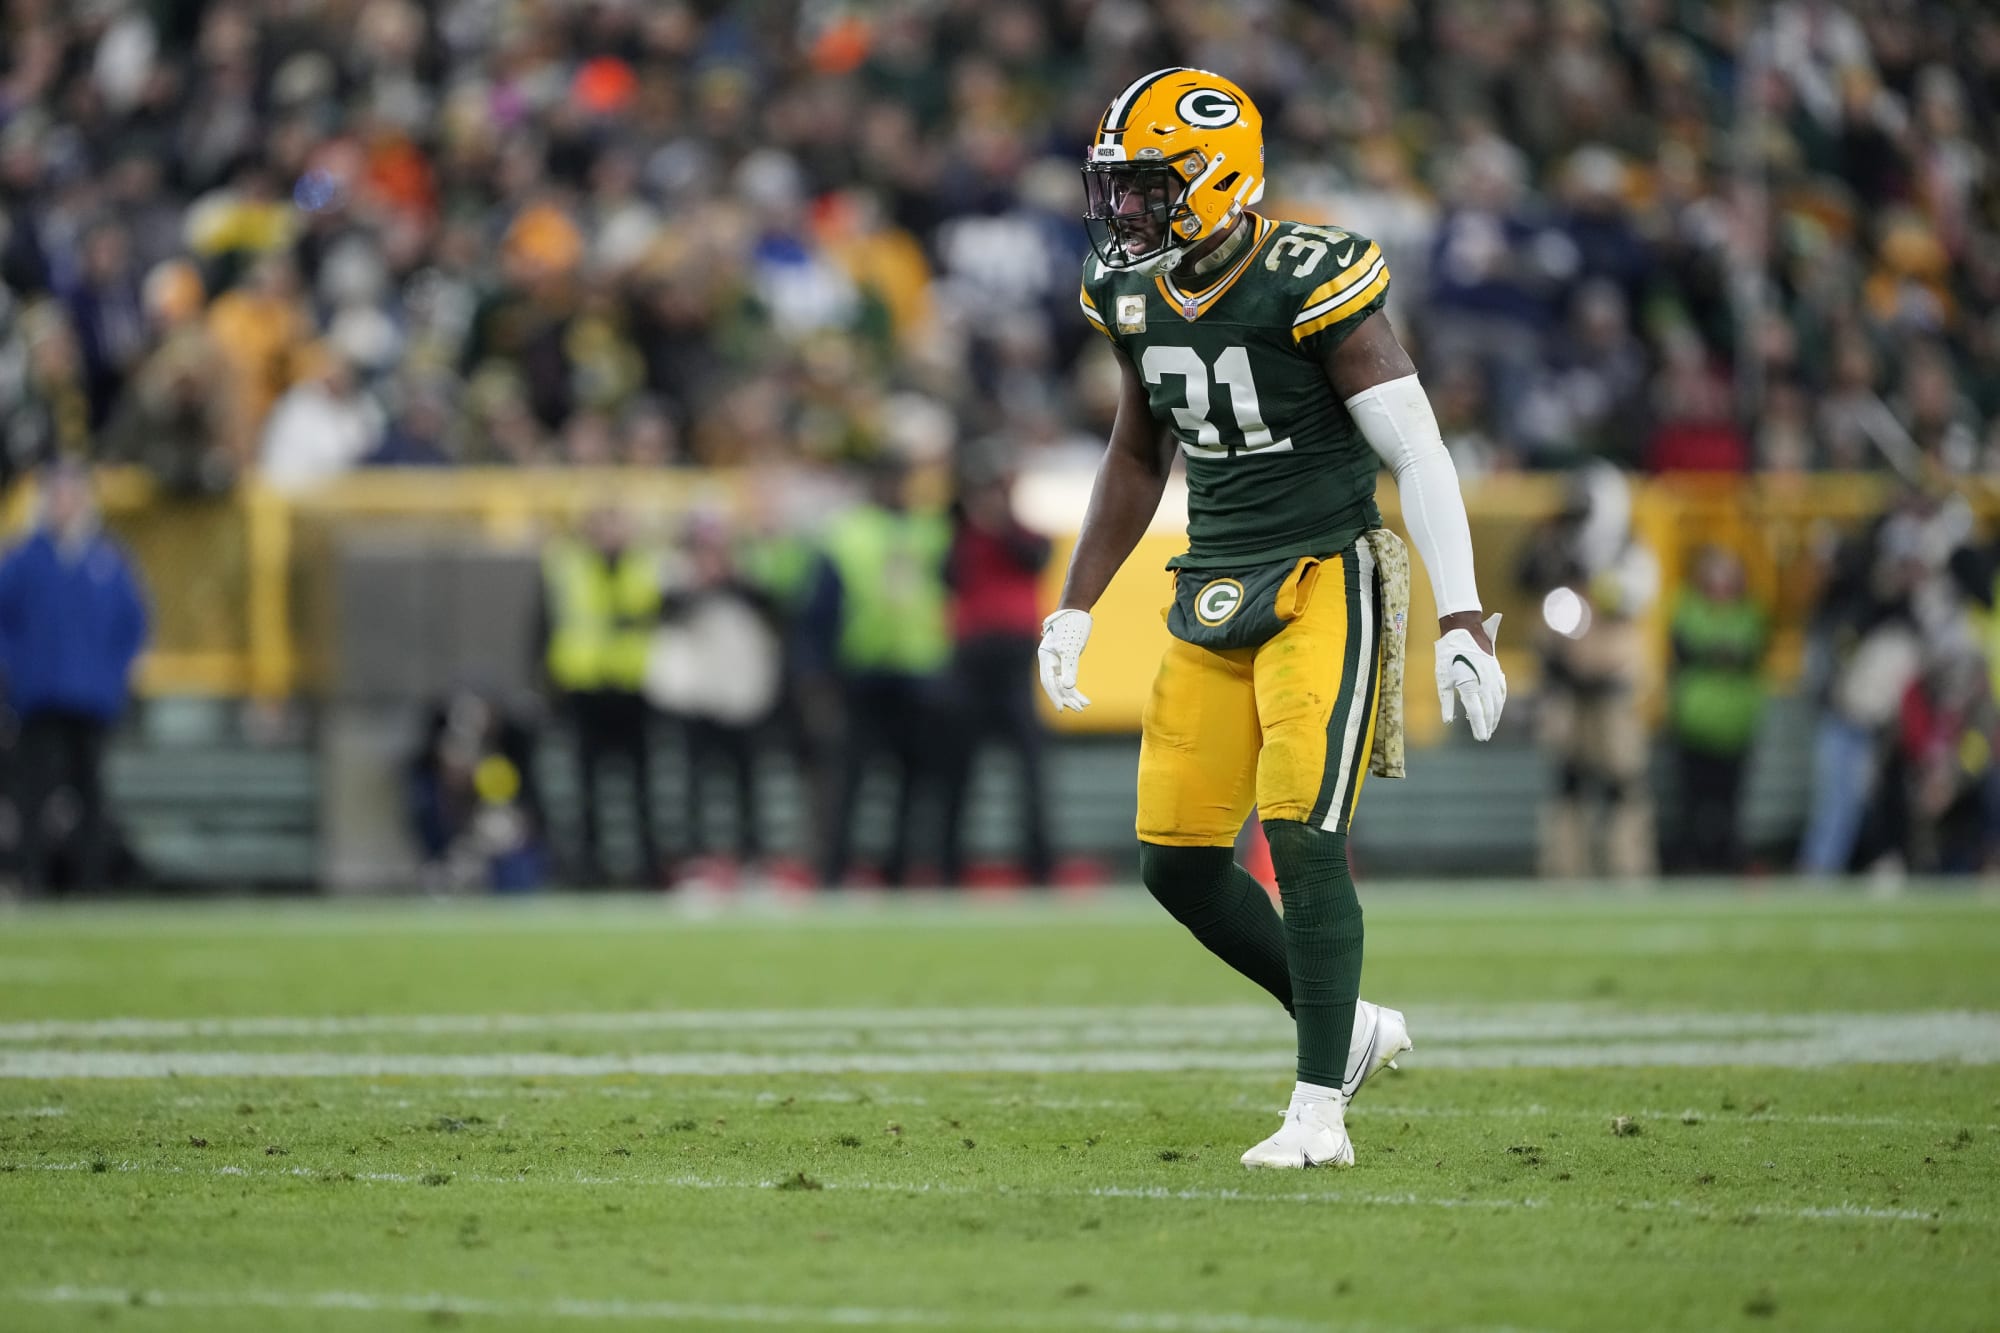 Packers: Signs pointing to potential Adrian Amos departure